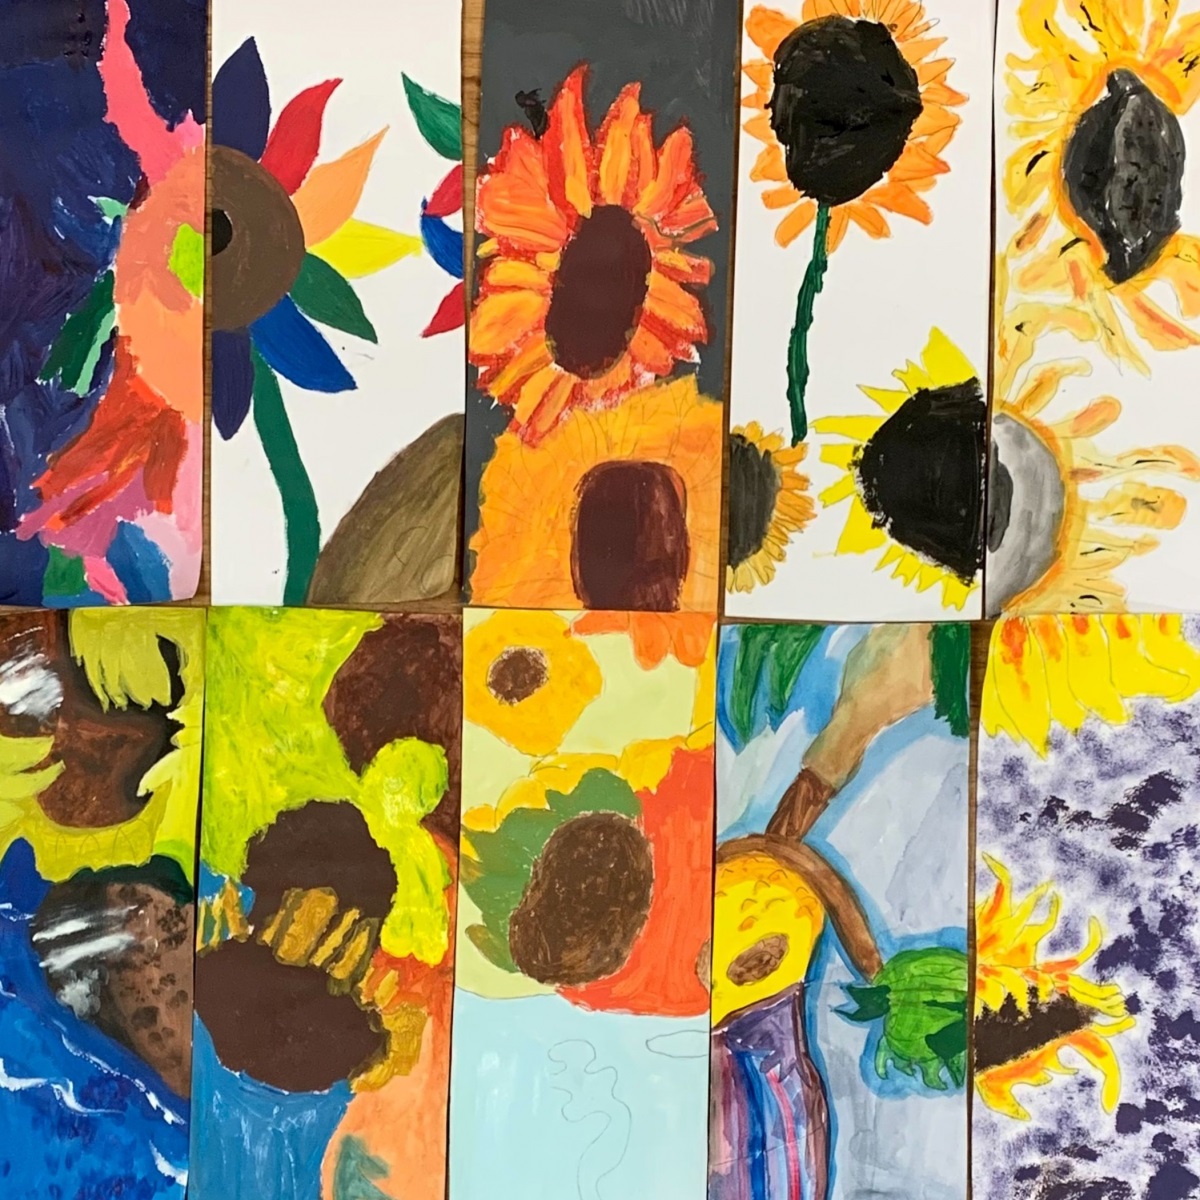 Ten paintings of sunflowers in various styles alongside each other in rows of five.